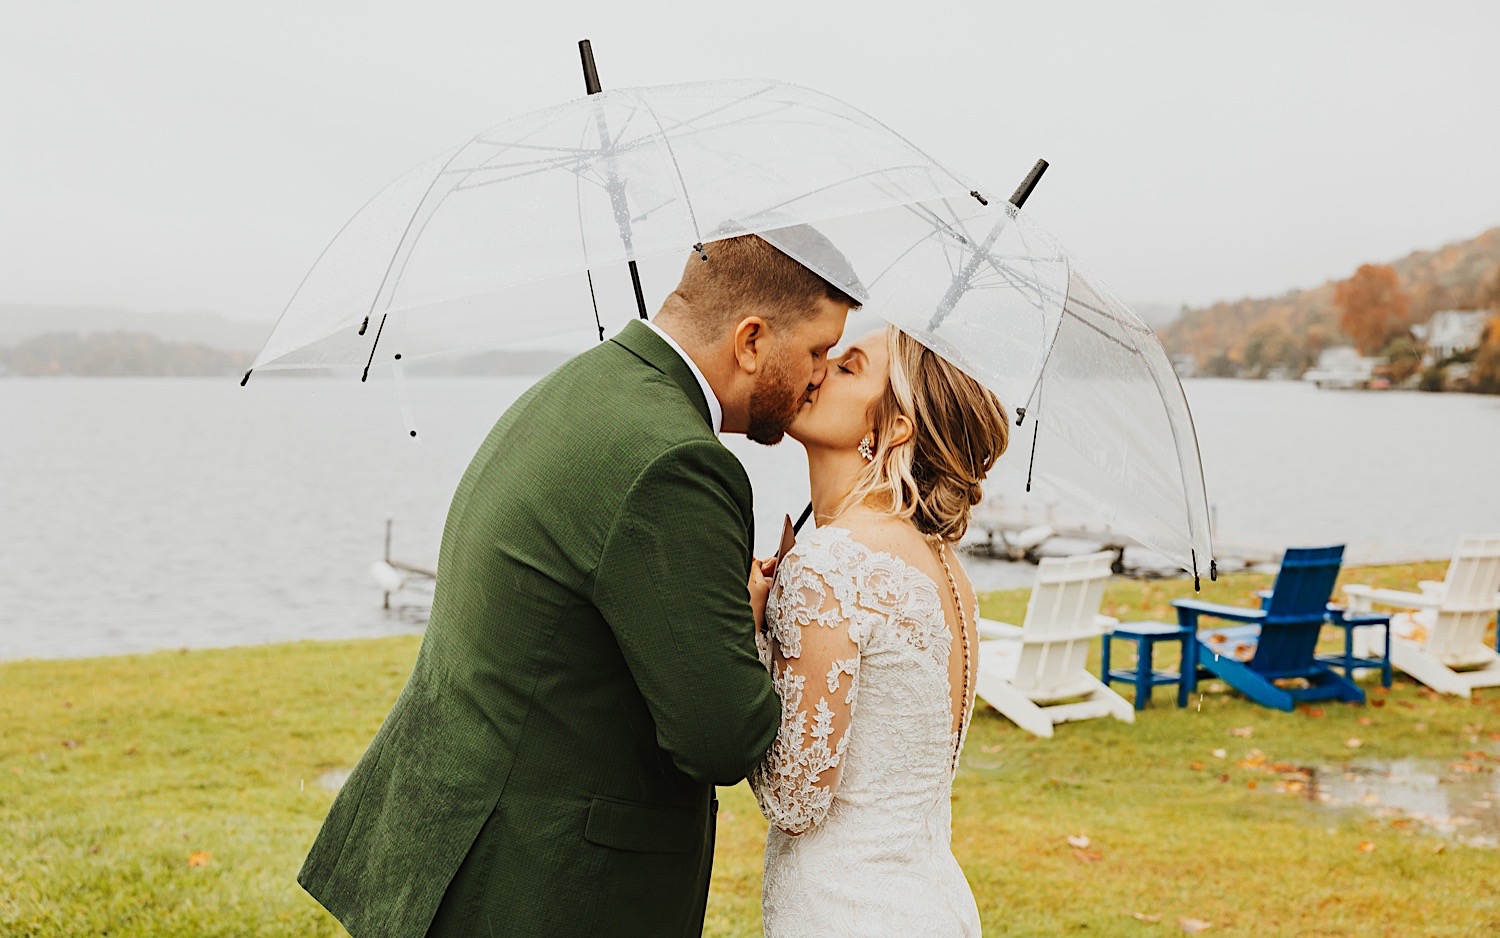 A bride and groom kiss while under clear umbrellas as they stand next to Lake Bomoseen in Vermont